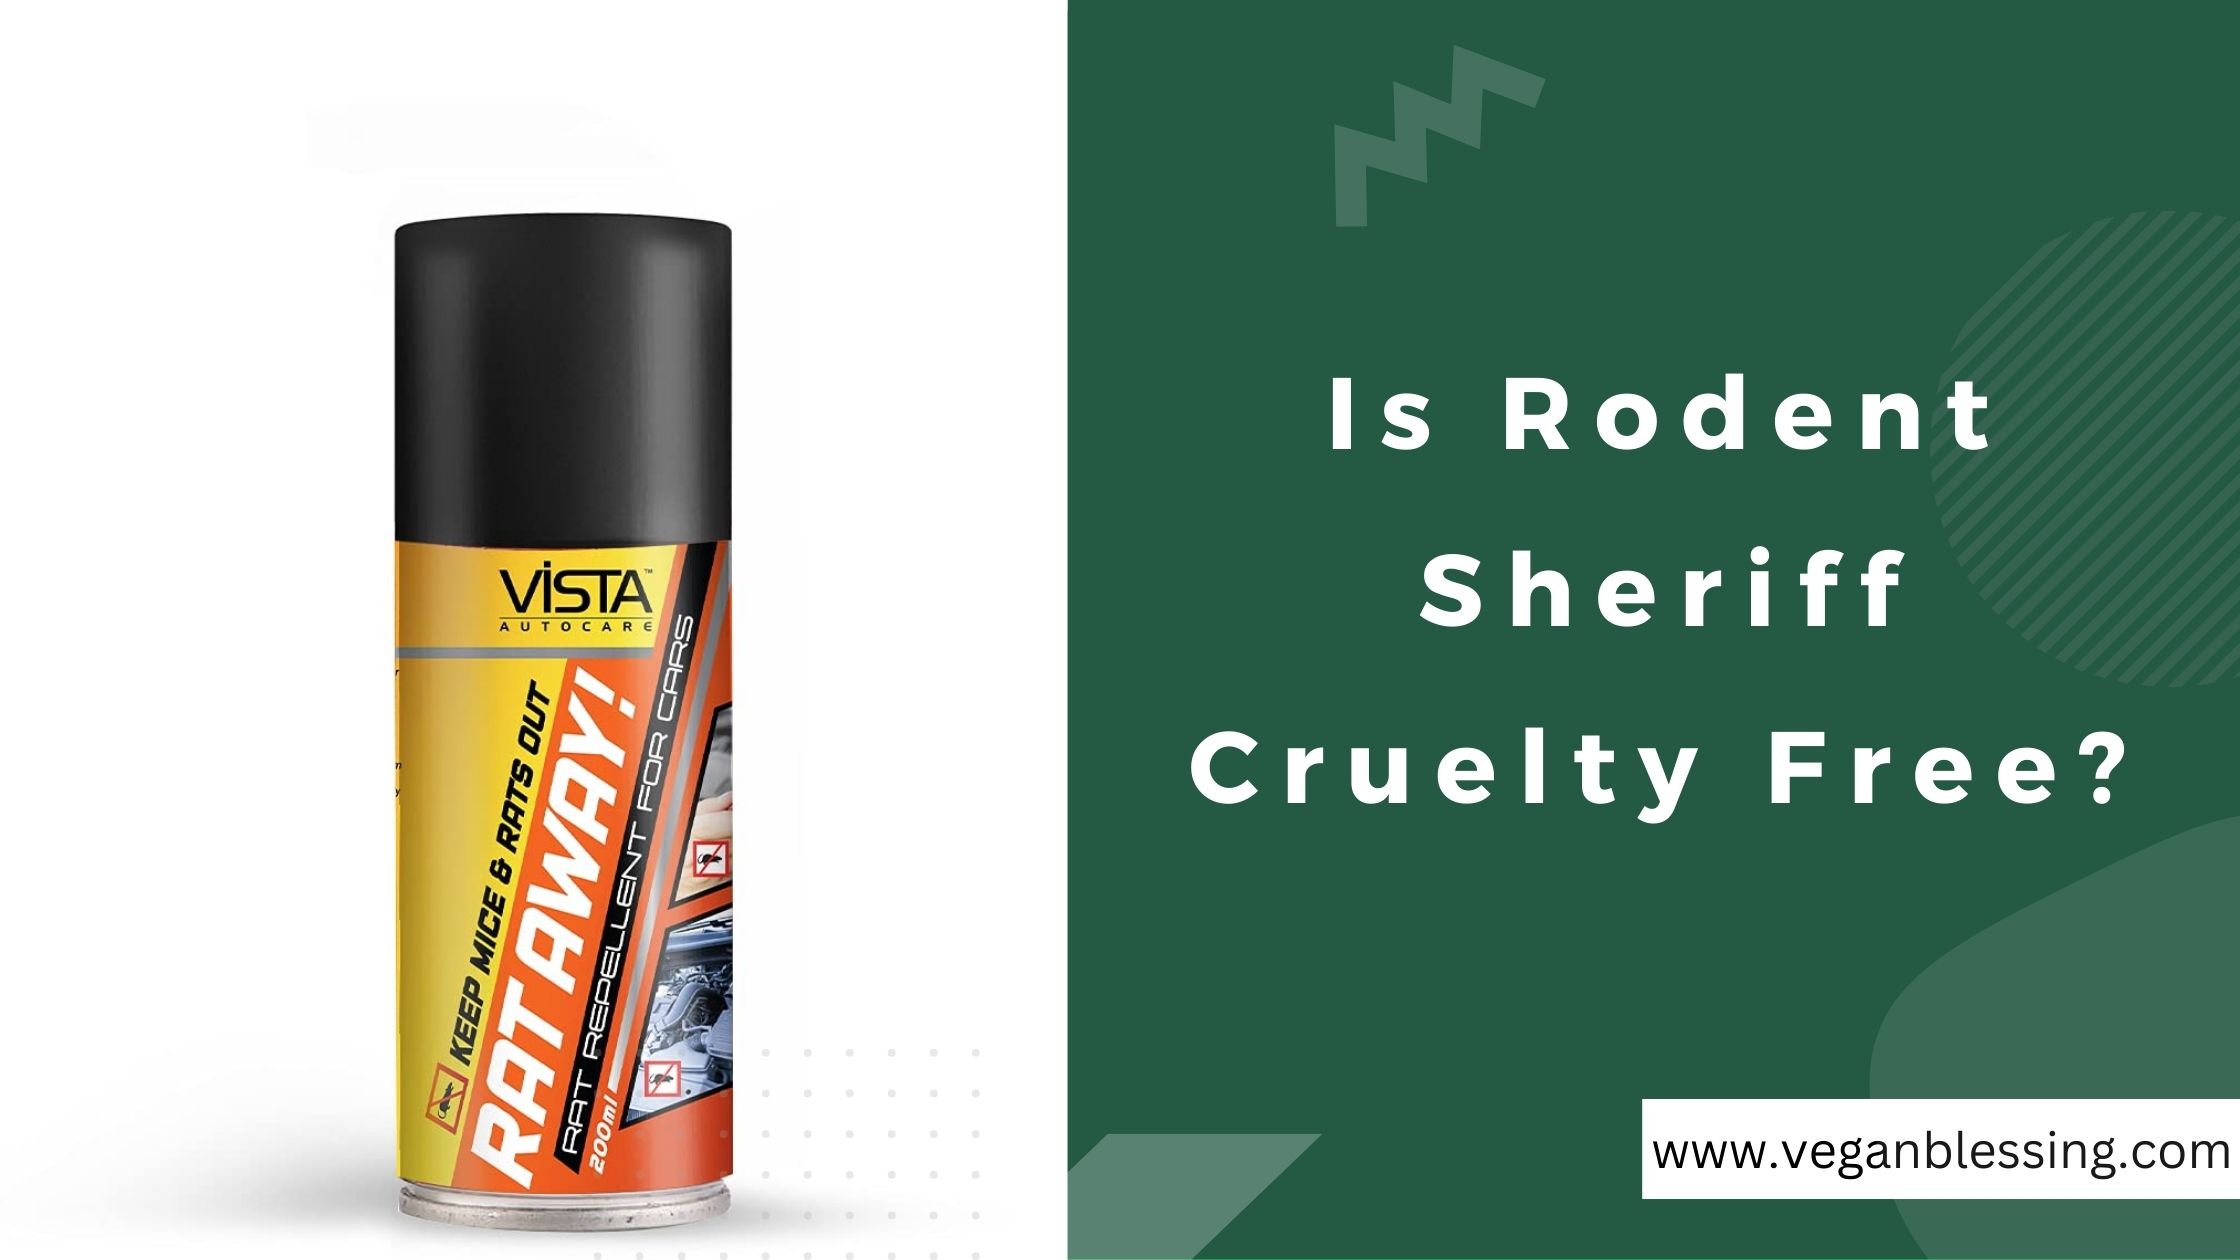 Is Rodent Sheriff Cruelty Free? Is Rodent Sheriff Cruelty Free